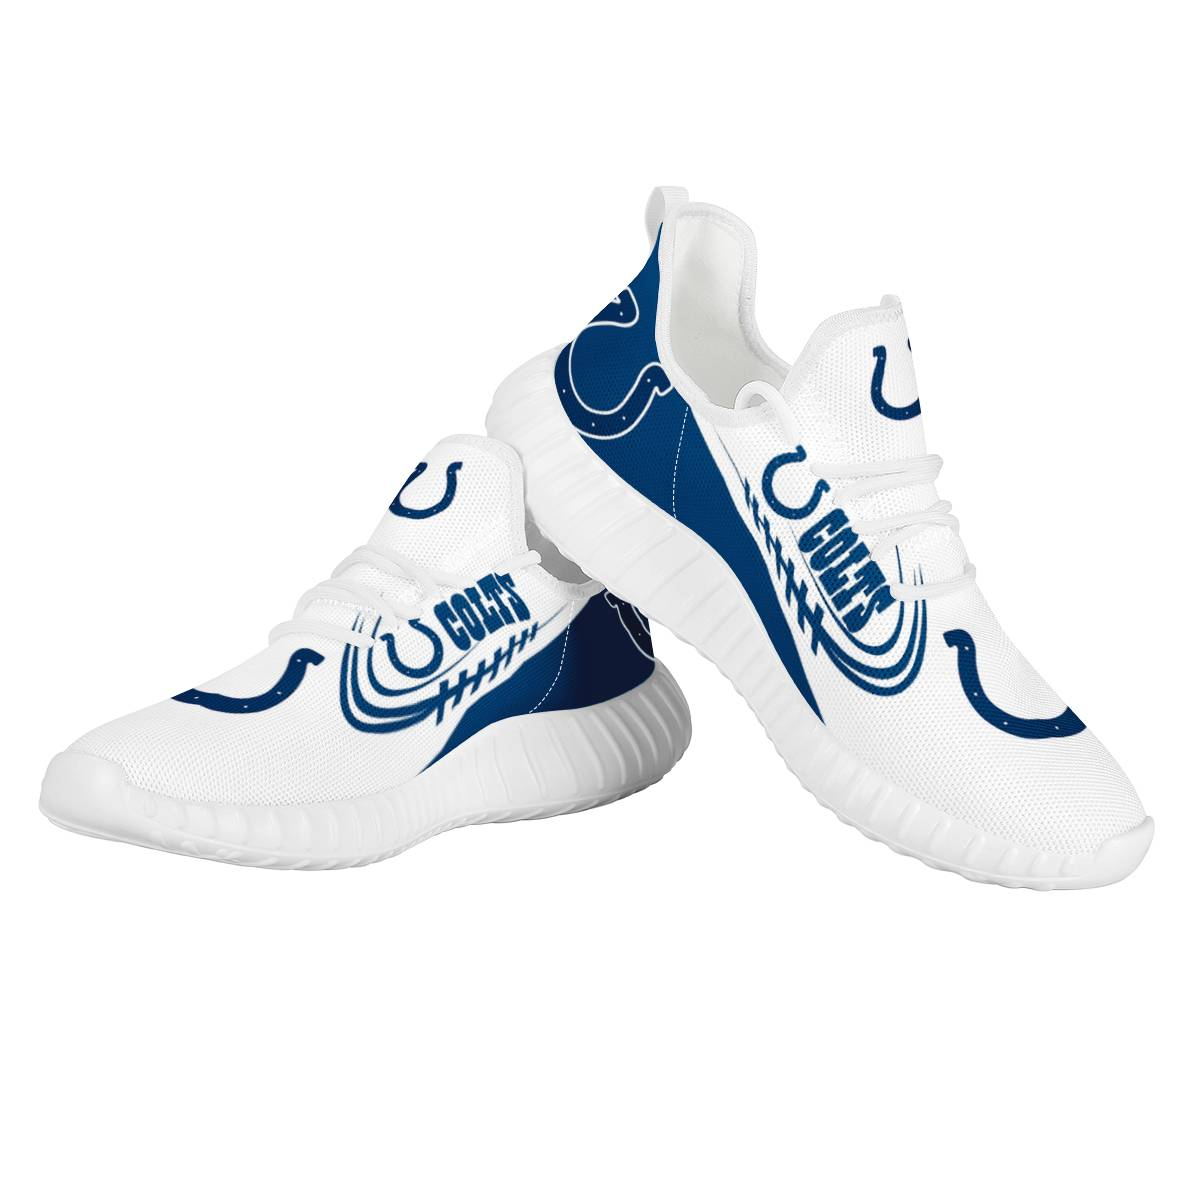 Men's Indianapolis Colts Mesh Knit Sneakers/Shoes 007